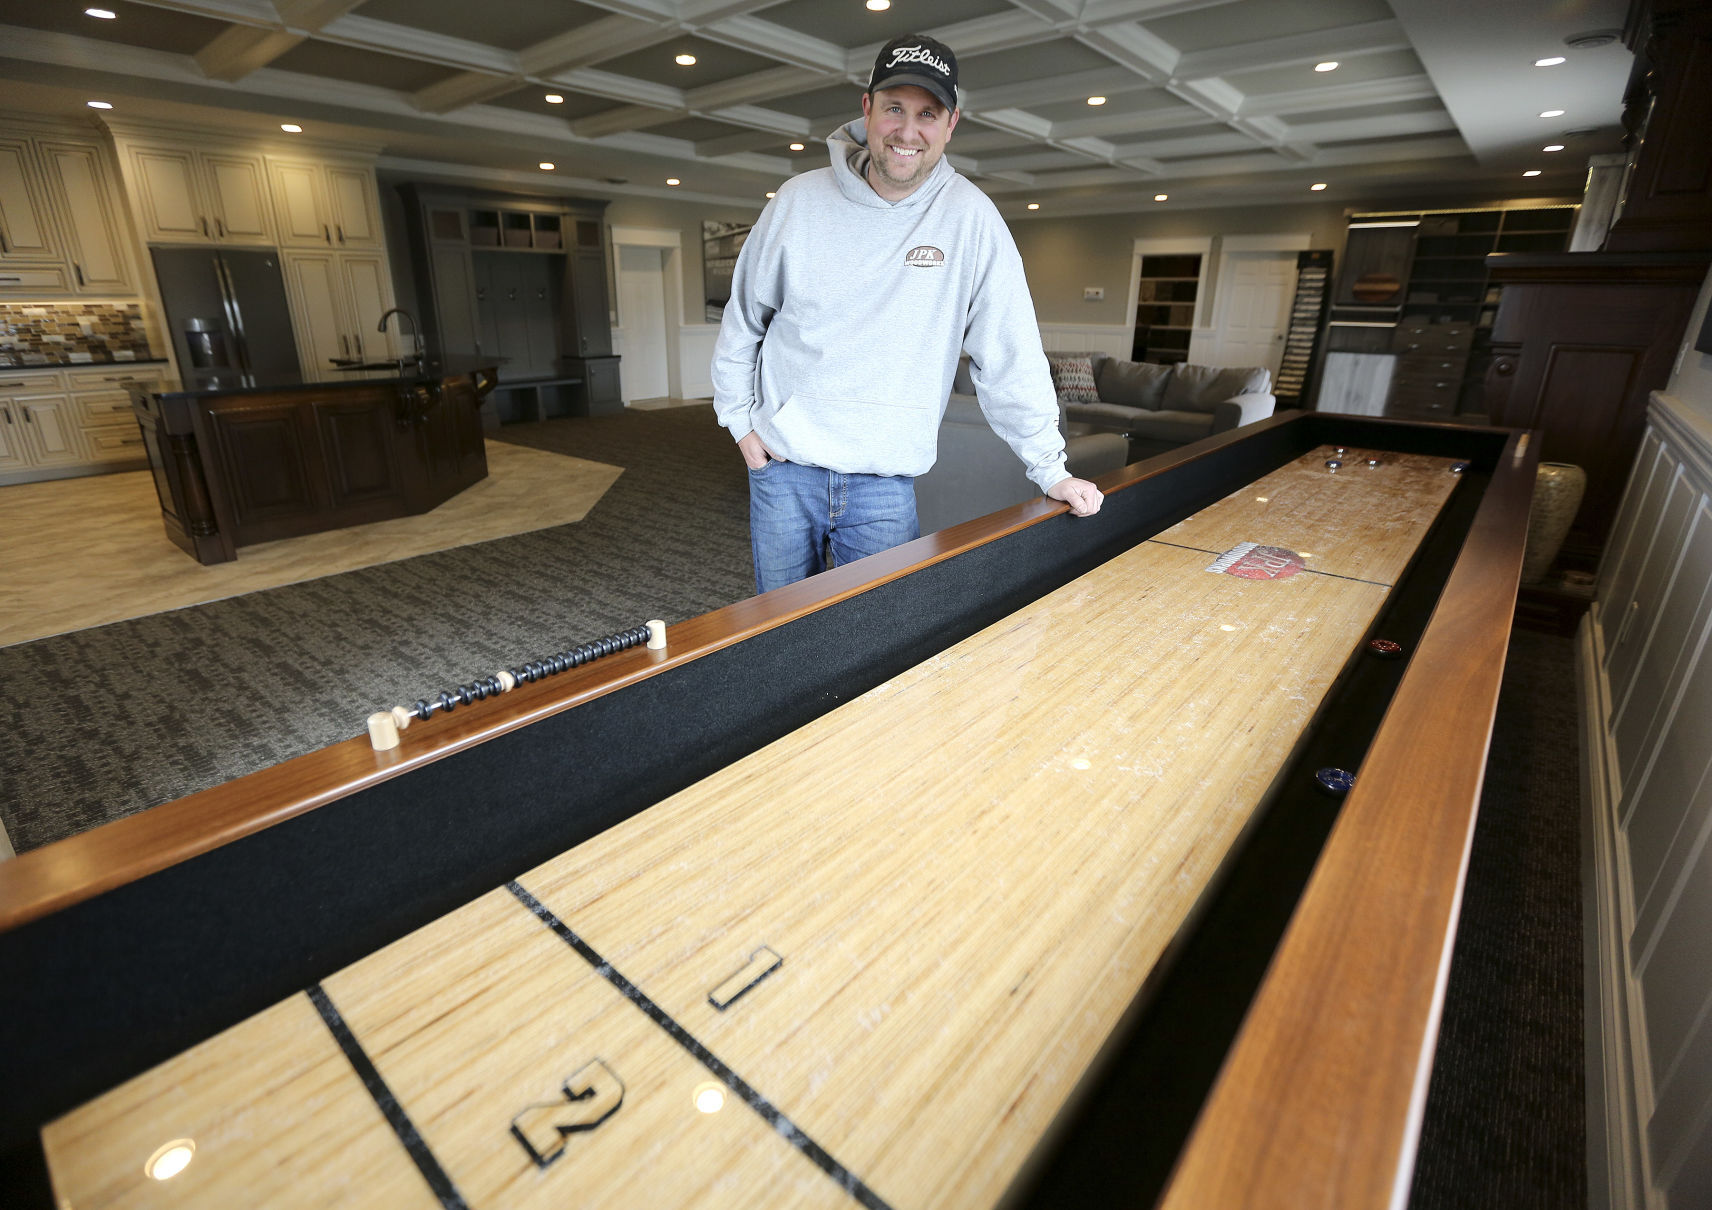 Jon Kluck, owner of JPK Woodworks, stands in his showroom Monday at 8005 Seippel Court in Dubuque.    PHOTO CREDIT: Dave Kettering